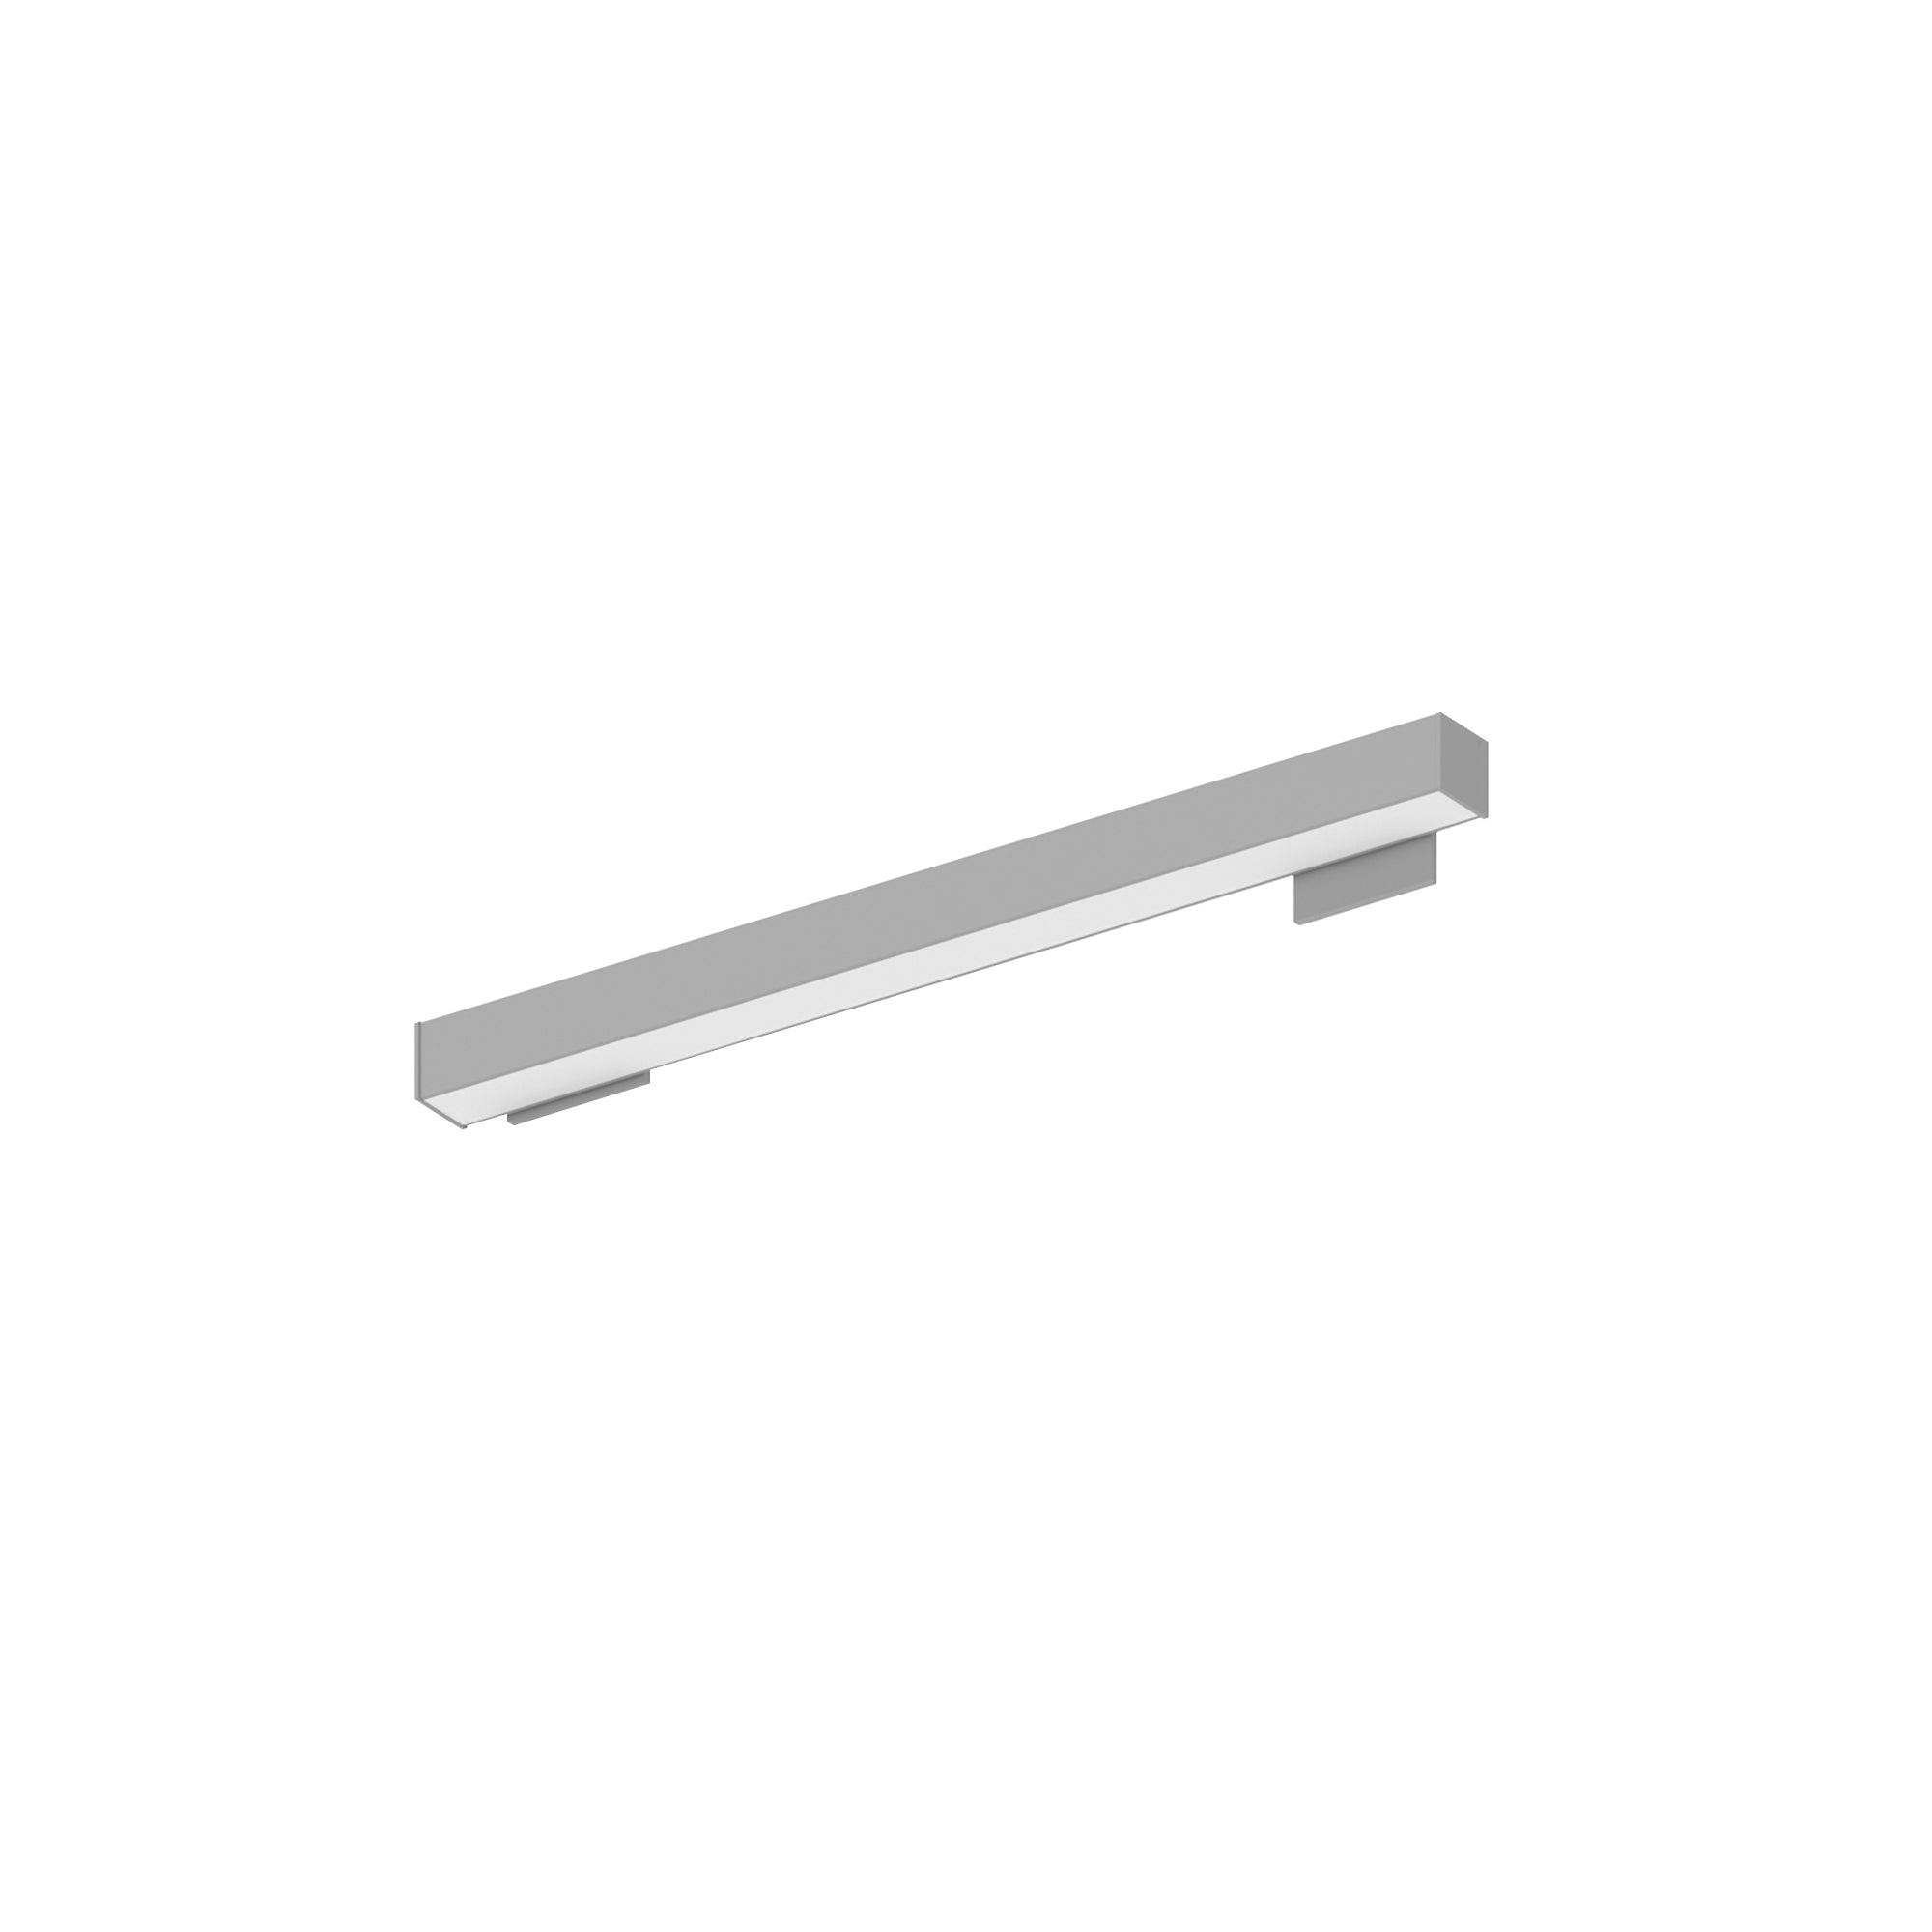 Nora Lighting NWLIN-21030A/L2P-R4 - Linear - 2' L-Line LED Wall Mount Linear, 2100lm / 3000K, 2 Inchx4 Inch Left Plate & 4 Inchx4 Inch Right Plate, Left Power Feed, Aluminum Finish